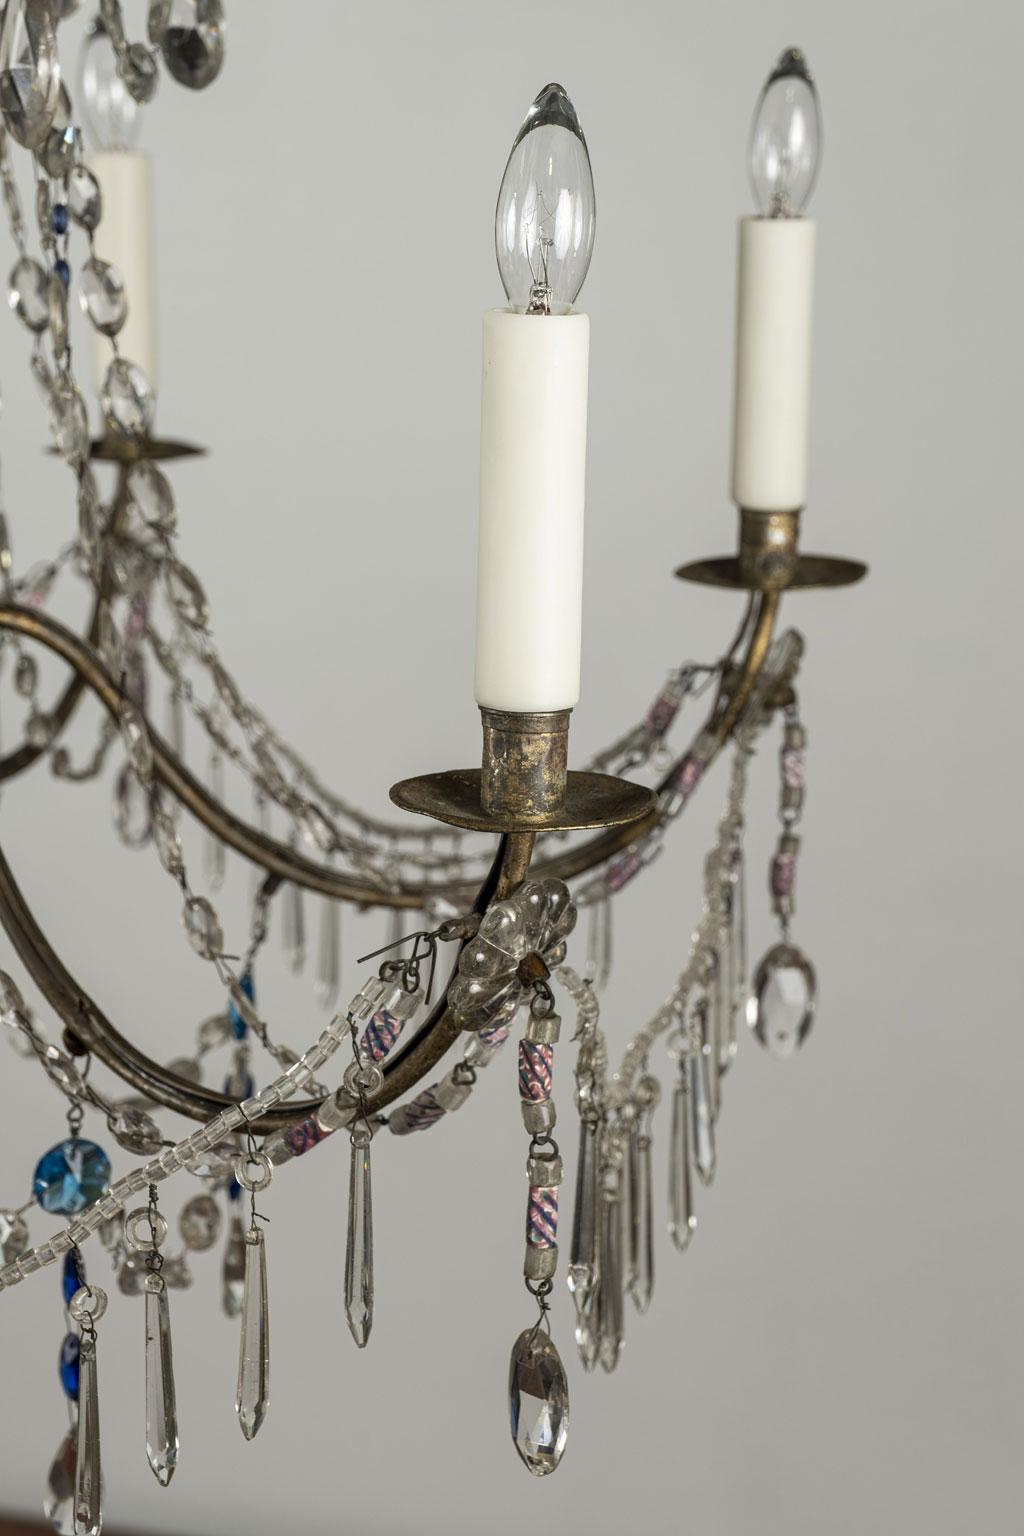 Late 18th century Genoese chandelier consisting of a carved giltwood body, original eight iron arms and original and later crystal prisms (clear and colored). Hand-blown and pressed glass decoration and beading. This Genoa chandelier includes extra